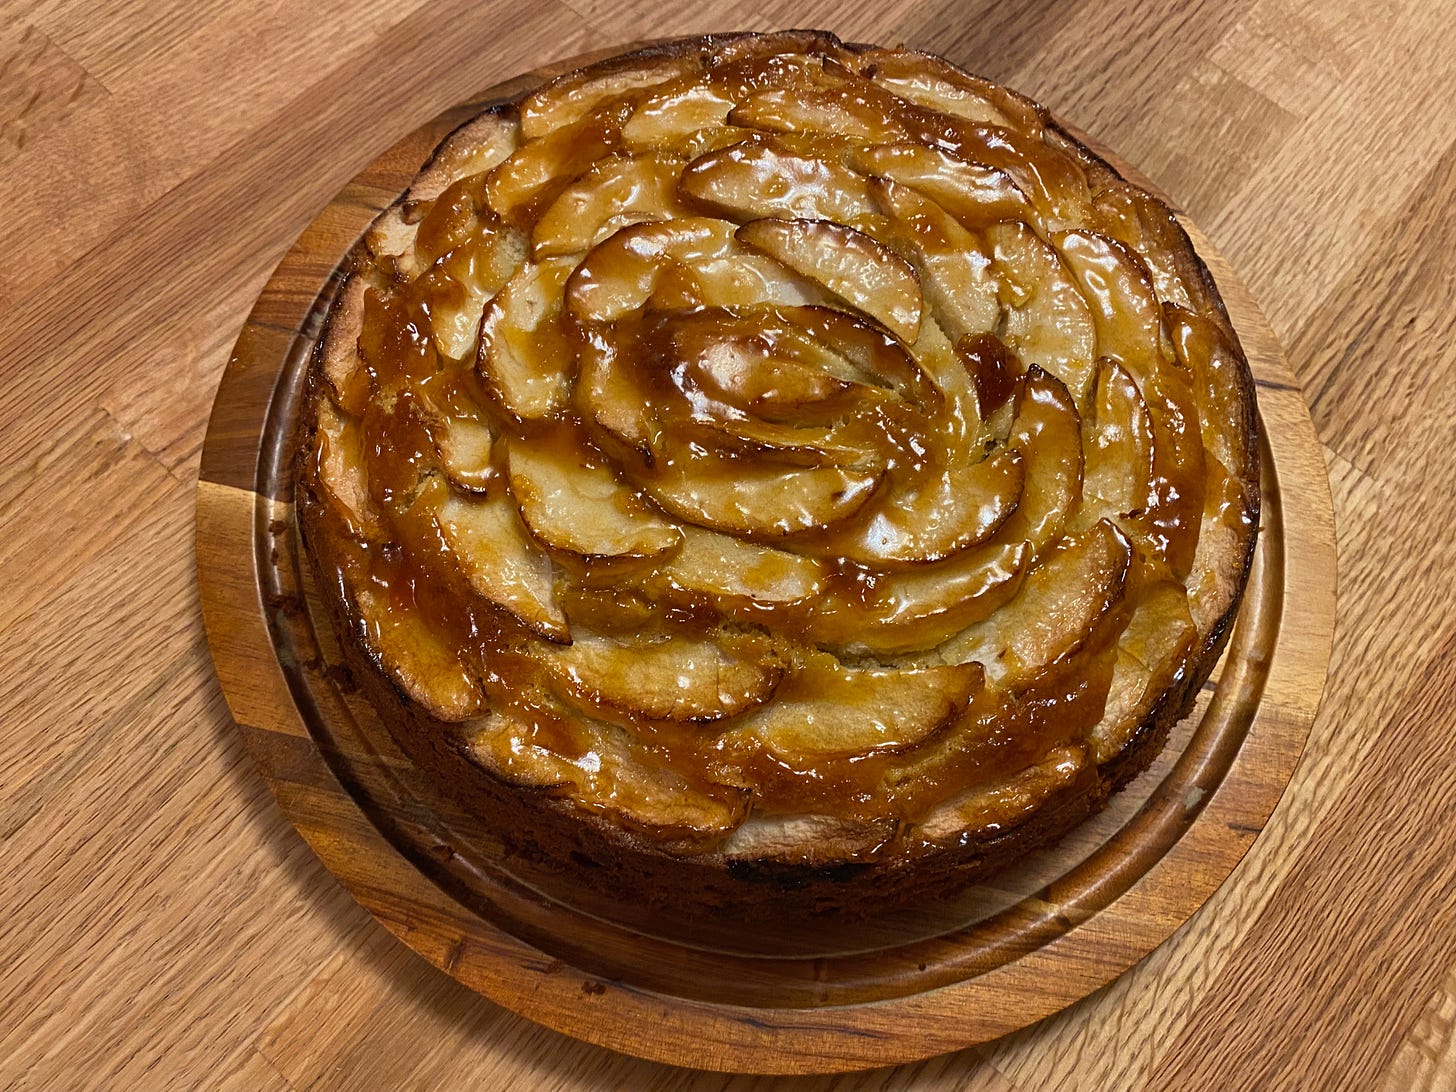 A round cake topped with apple slices arranged in concentric overlapping circles, shiny with apricot glaze.